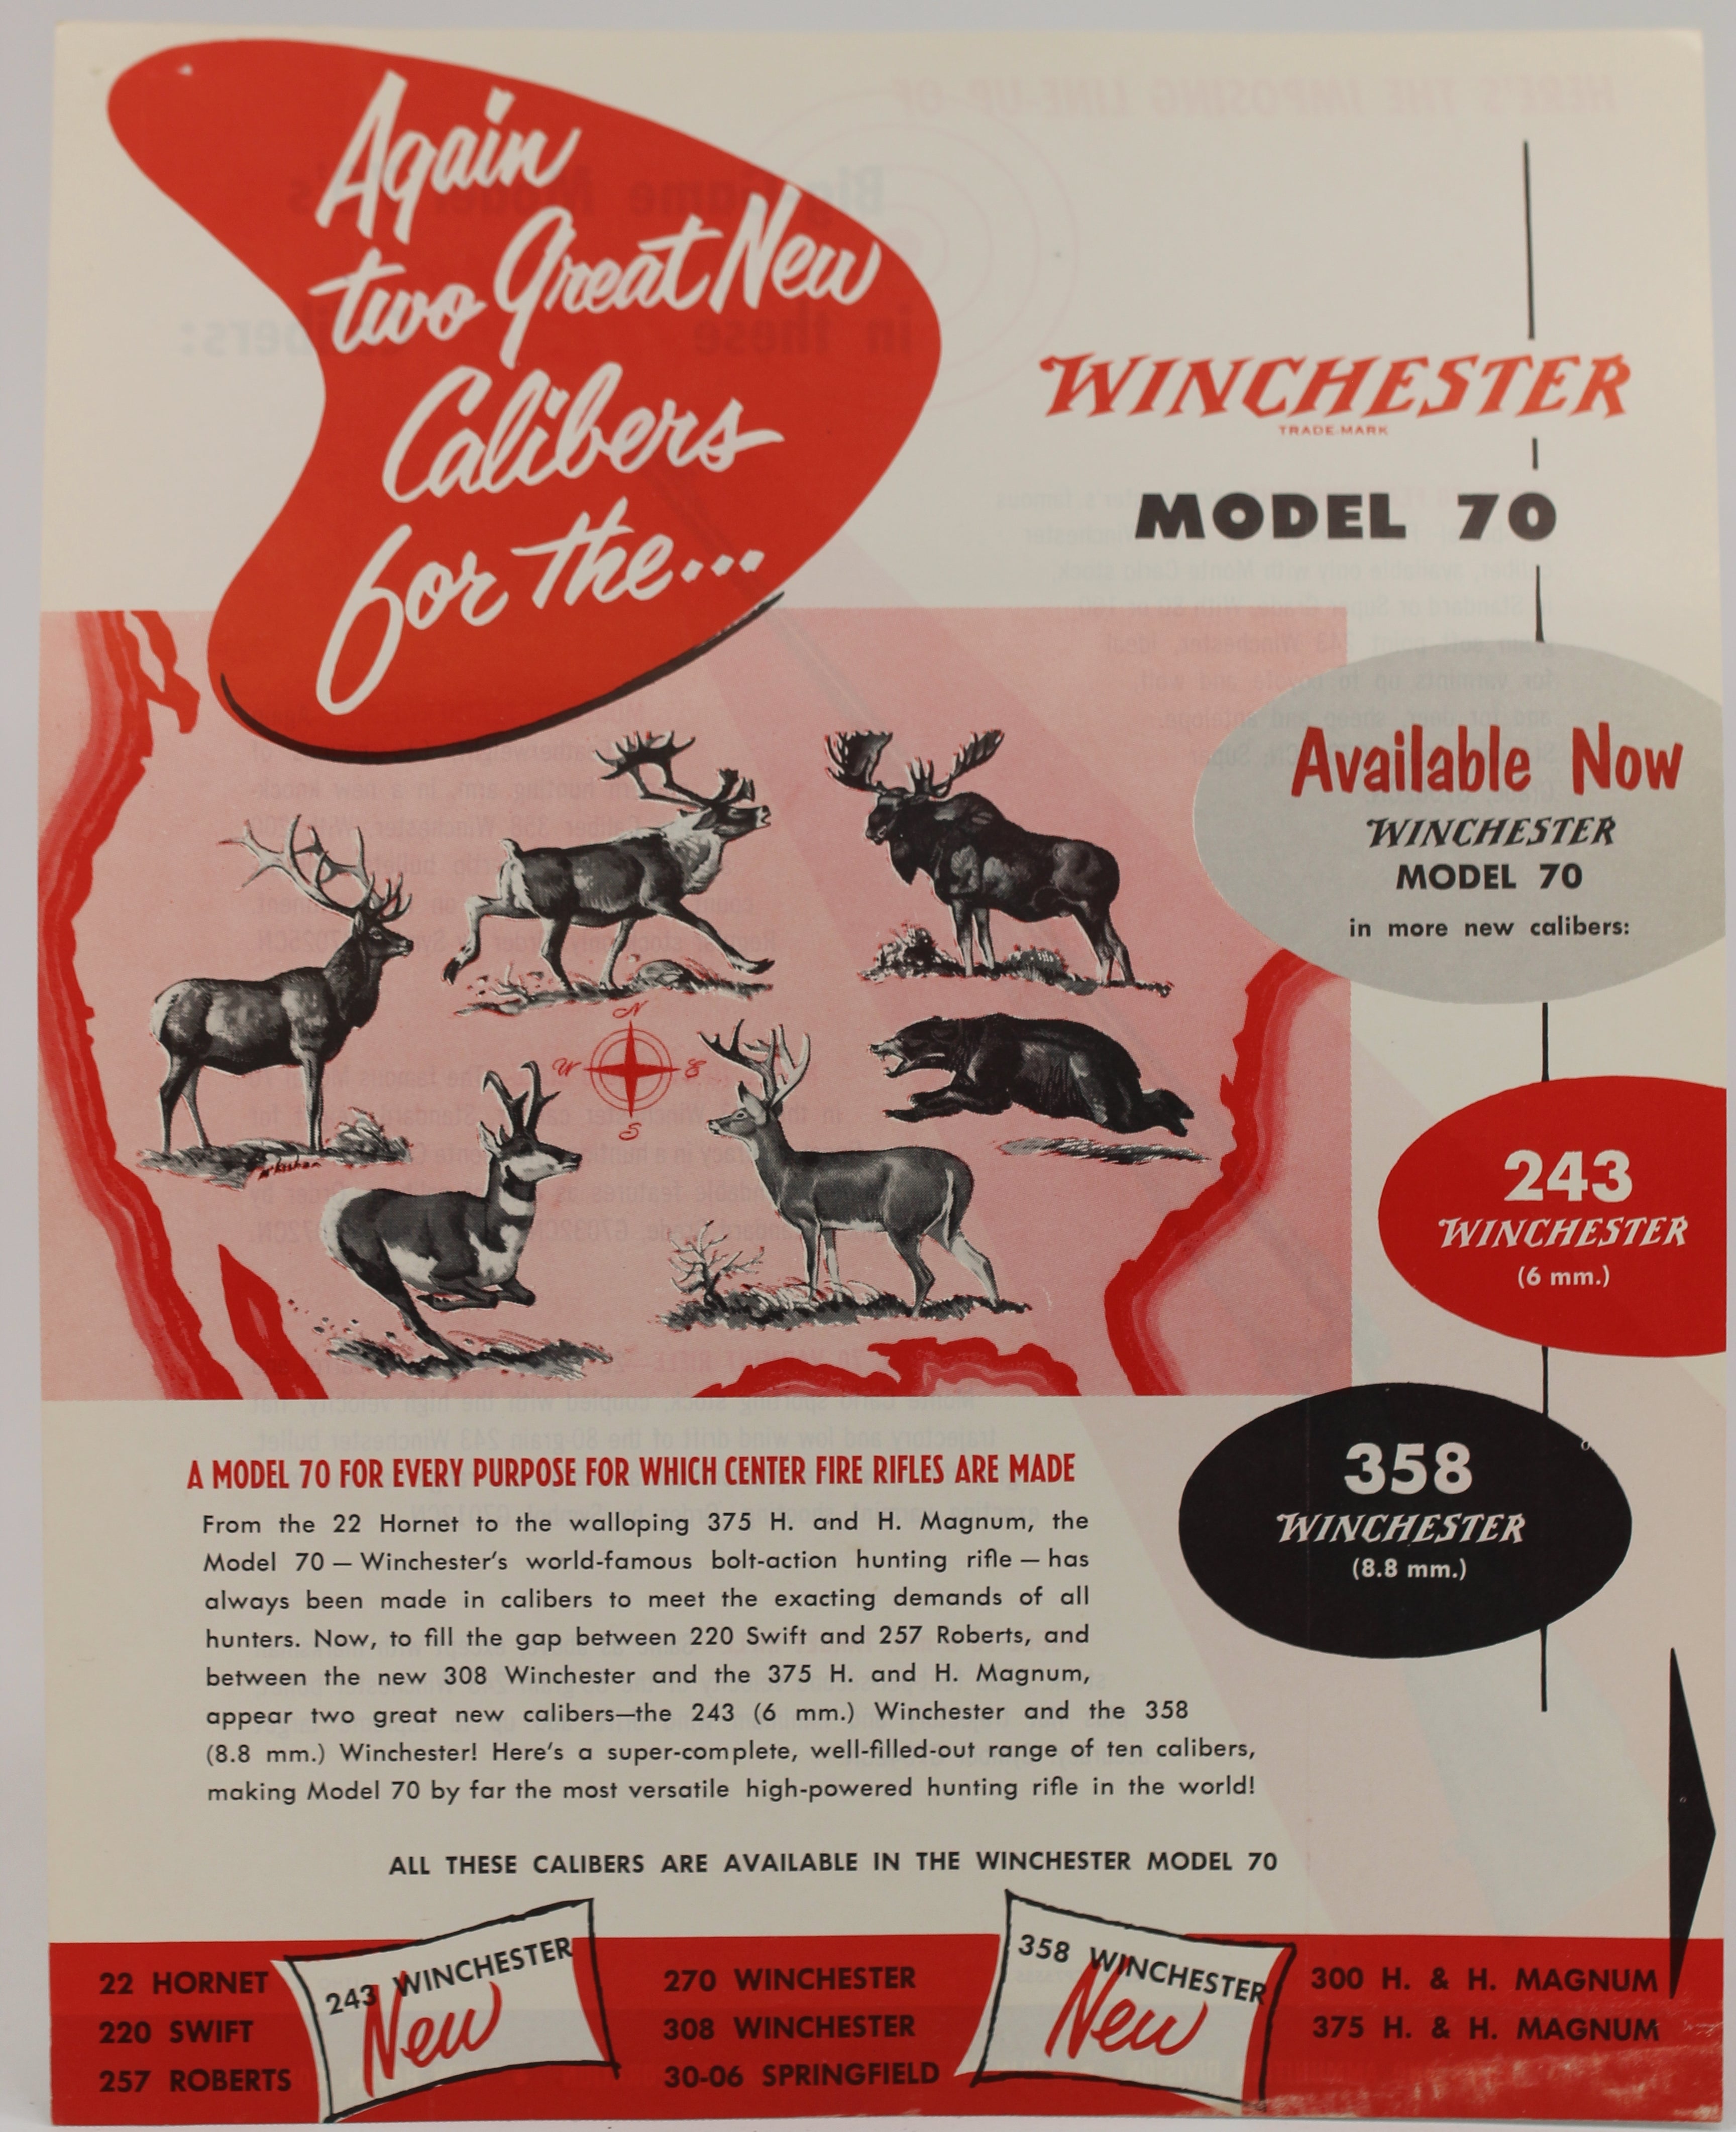 Complete Dealer Package - Winchester Model 70 FWT in two new calibers: 243 and 358